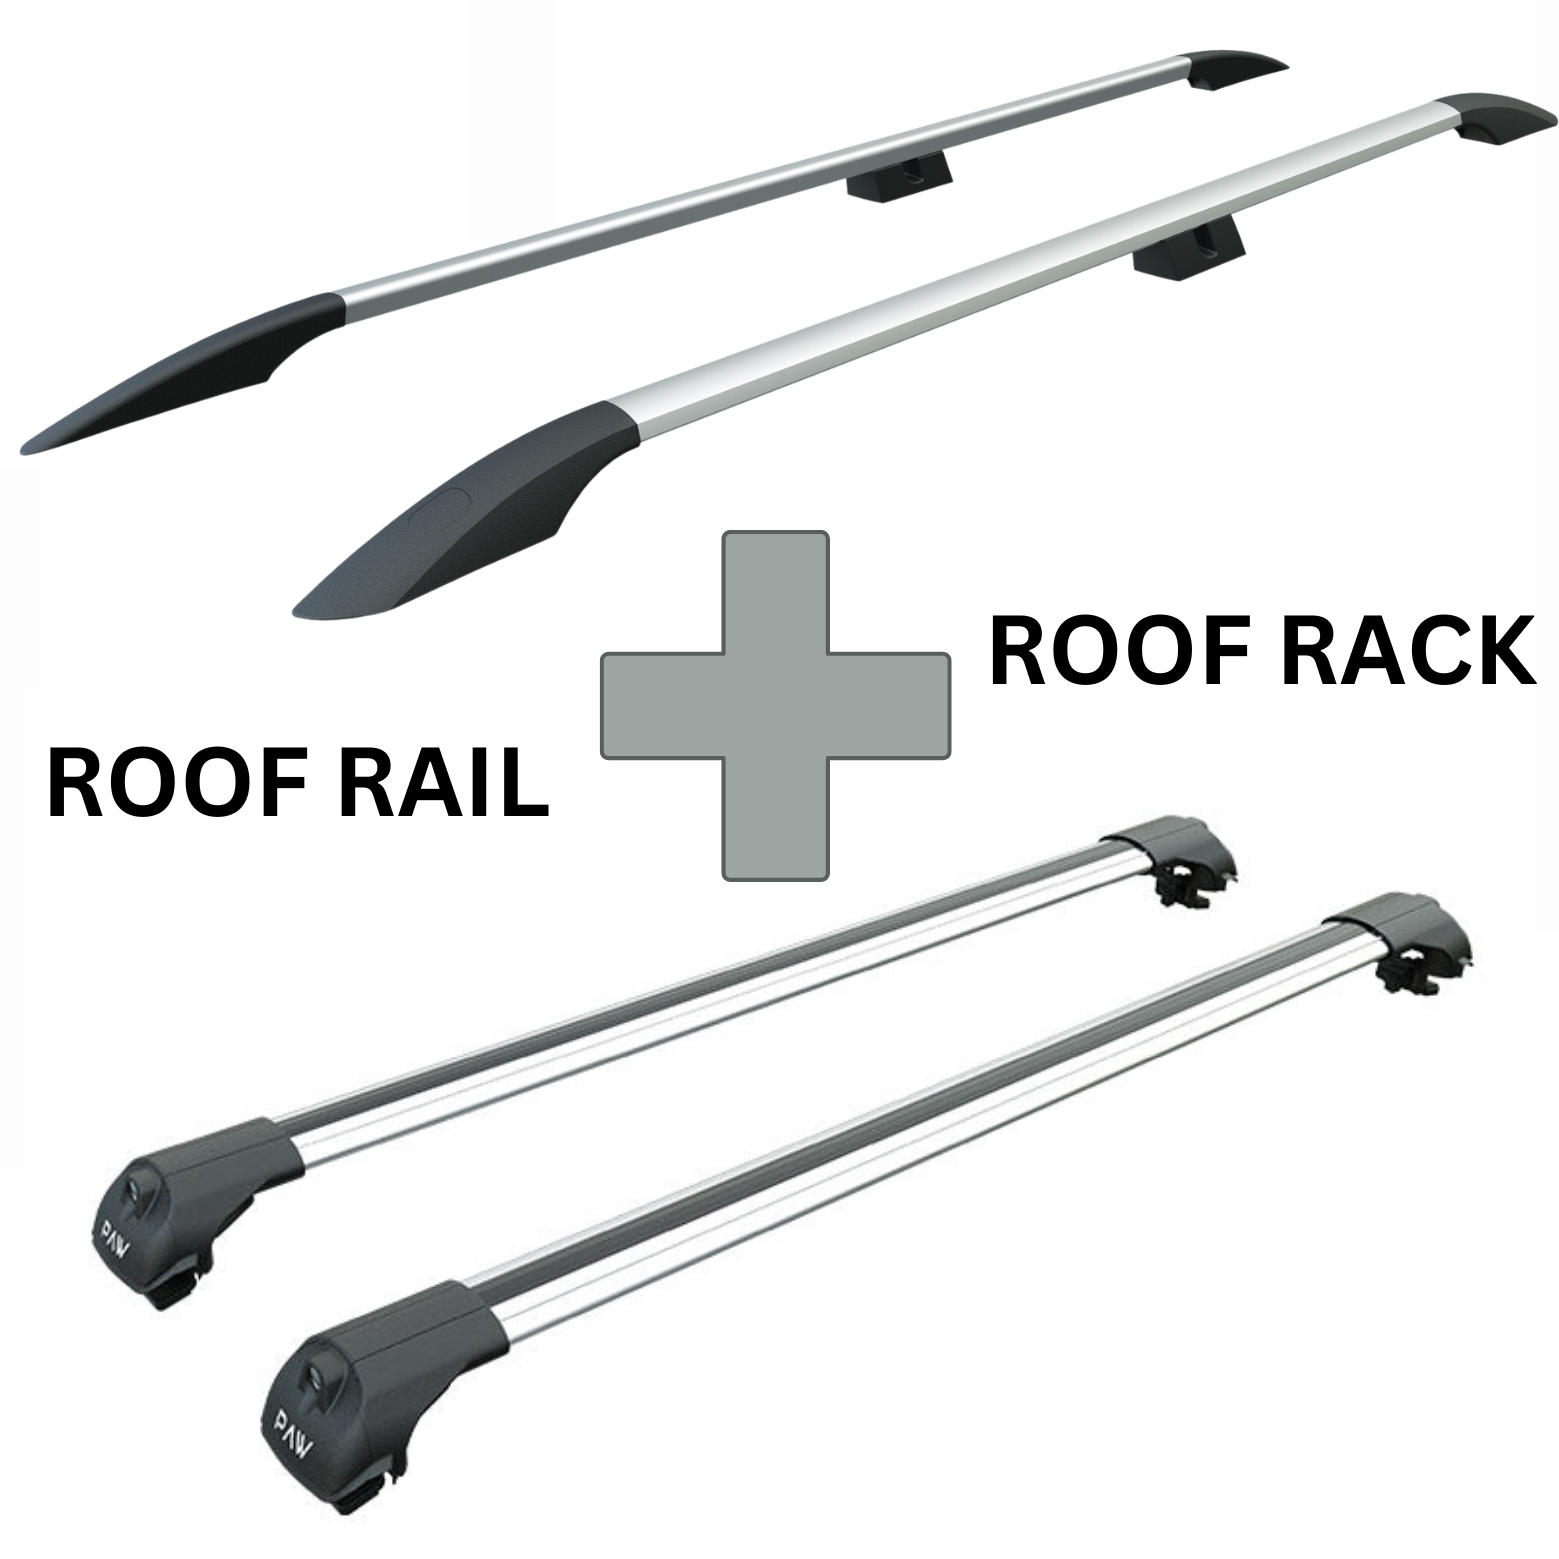 For Volkswagen Caddy Maxi V 2020-Up Roof Side Rails and Roof Rack Cross Bar Alu Silver